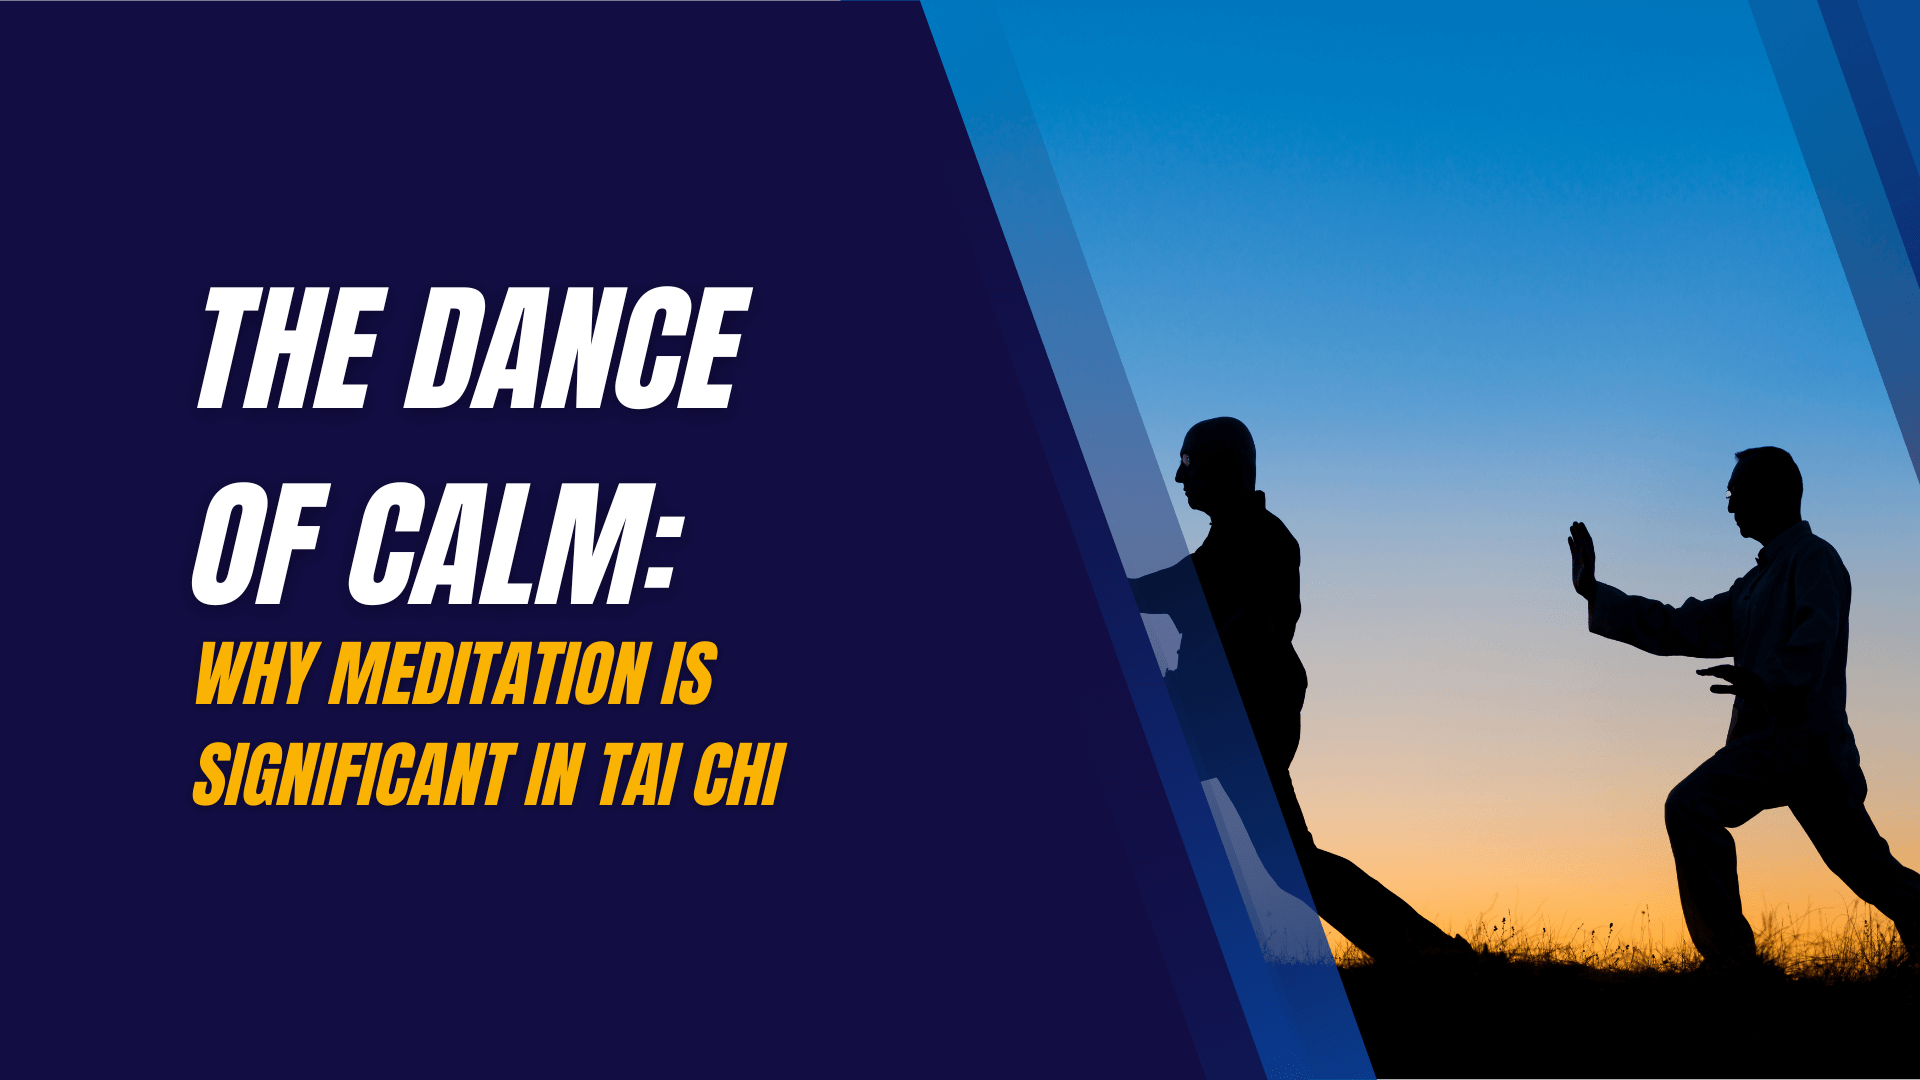 The Dance of Calm: Why Meditation is Significant in Tai Chi